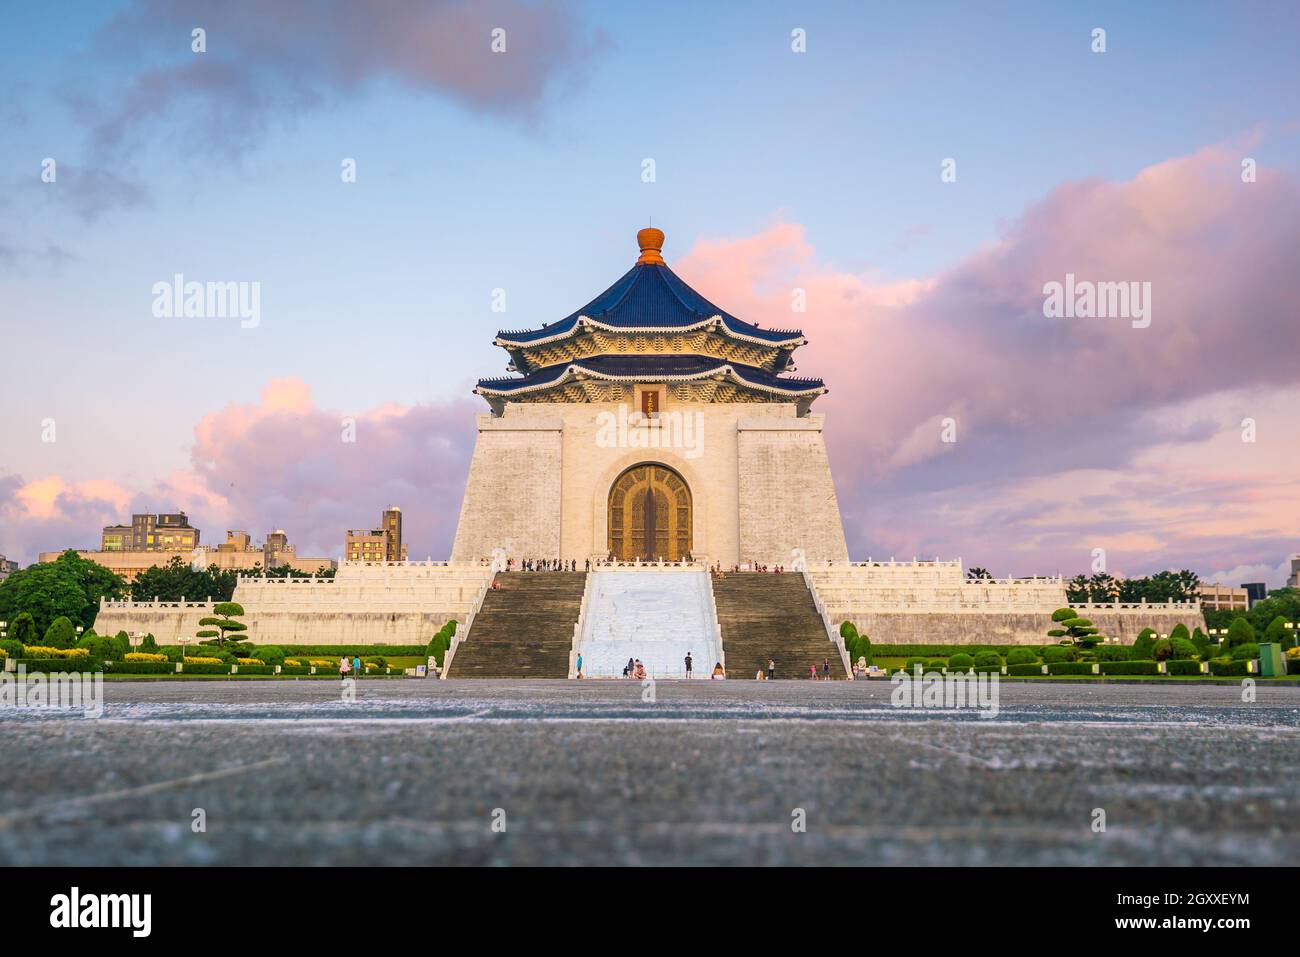 Chiang Kai-shek memorial in Taipei, Taiwan Chinese characters on the walls represent Chiang Kai-shek’s political values of ethics, democracy and scien Stock Photo